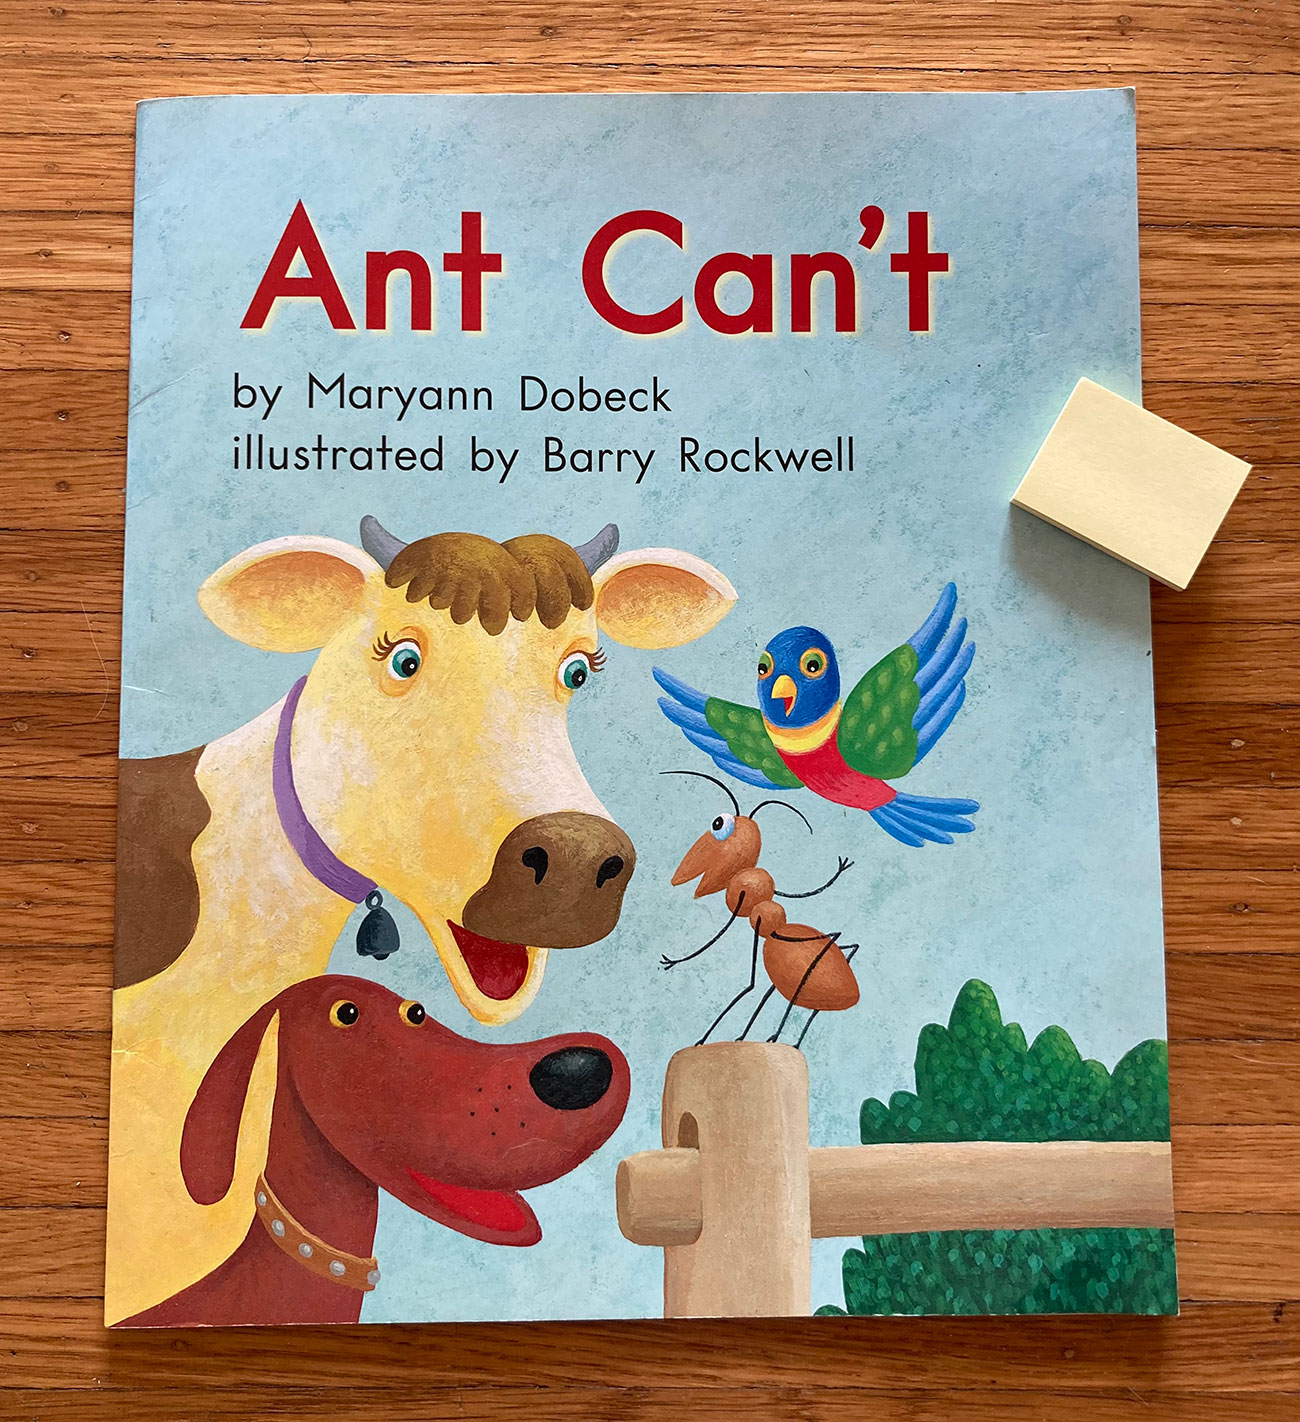 Cover of Ant Can't predictable book showing a cow, dog, bird, and ant